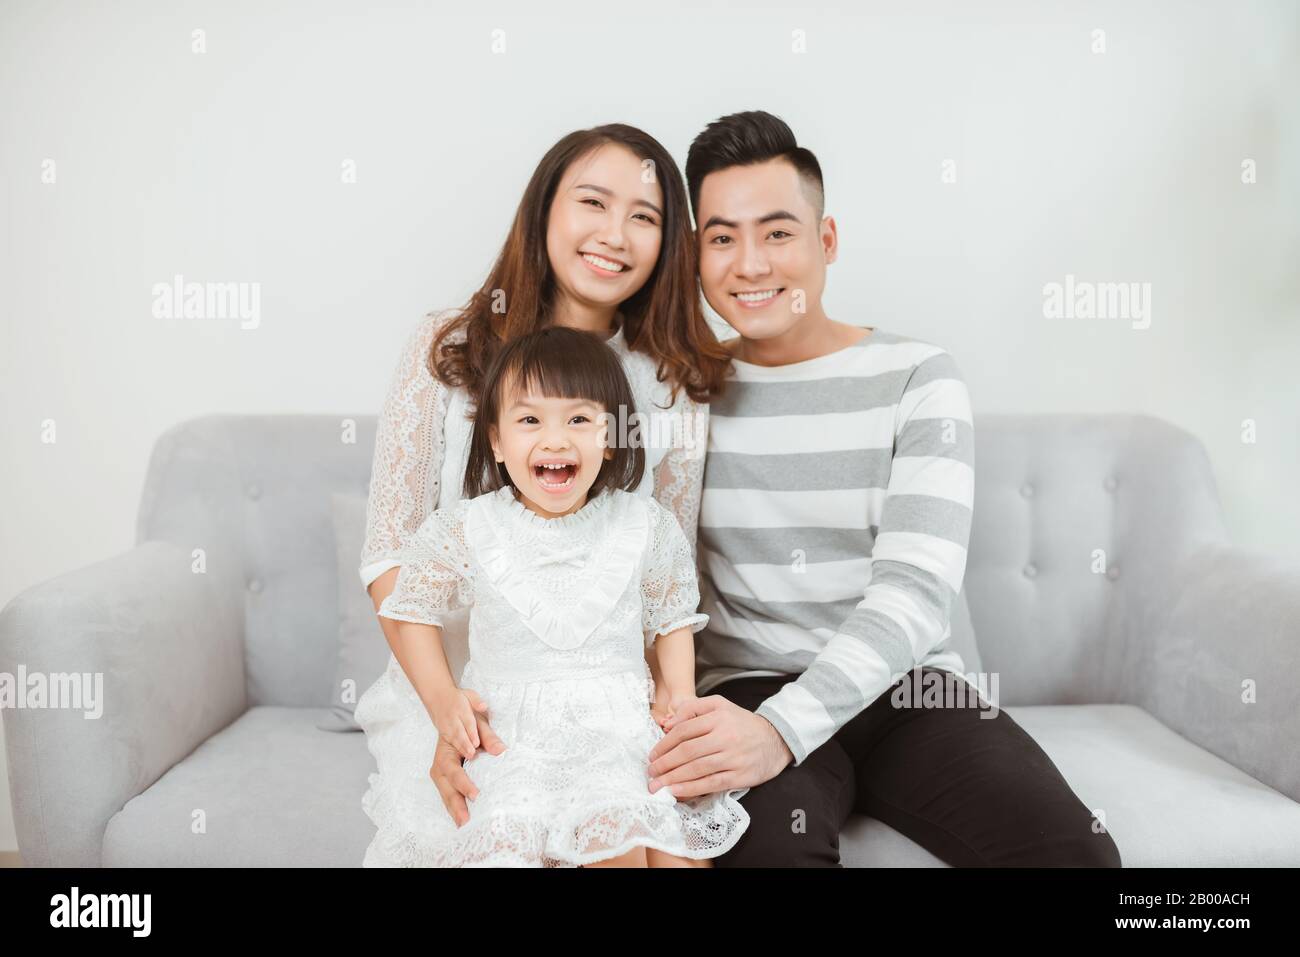 Happy young family sitting on sofa and enjoying good times together Stock Photo